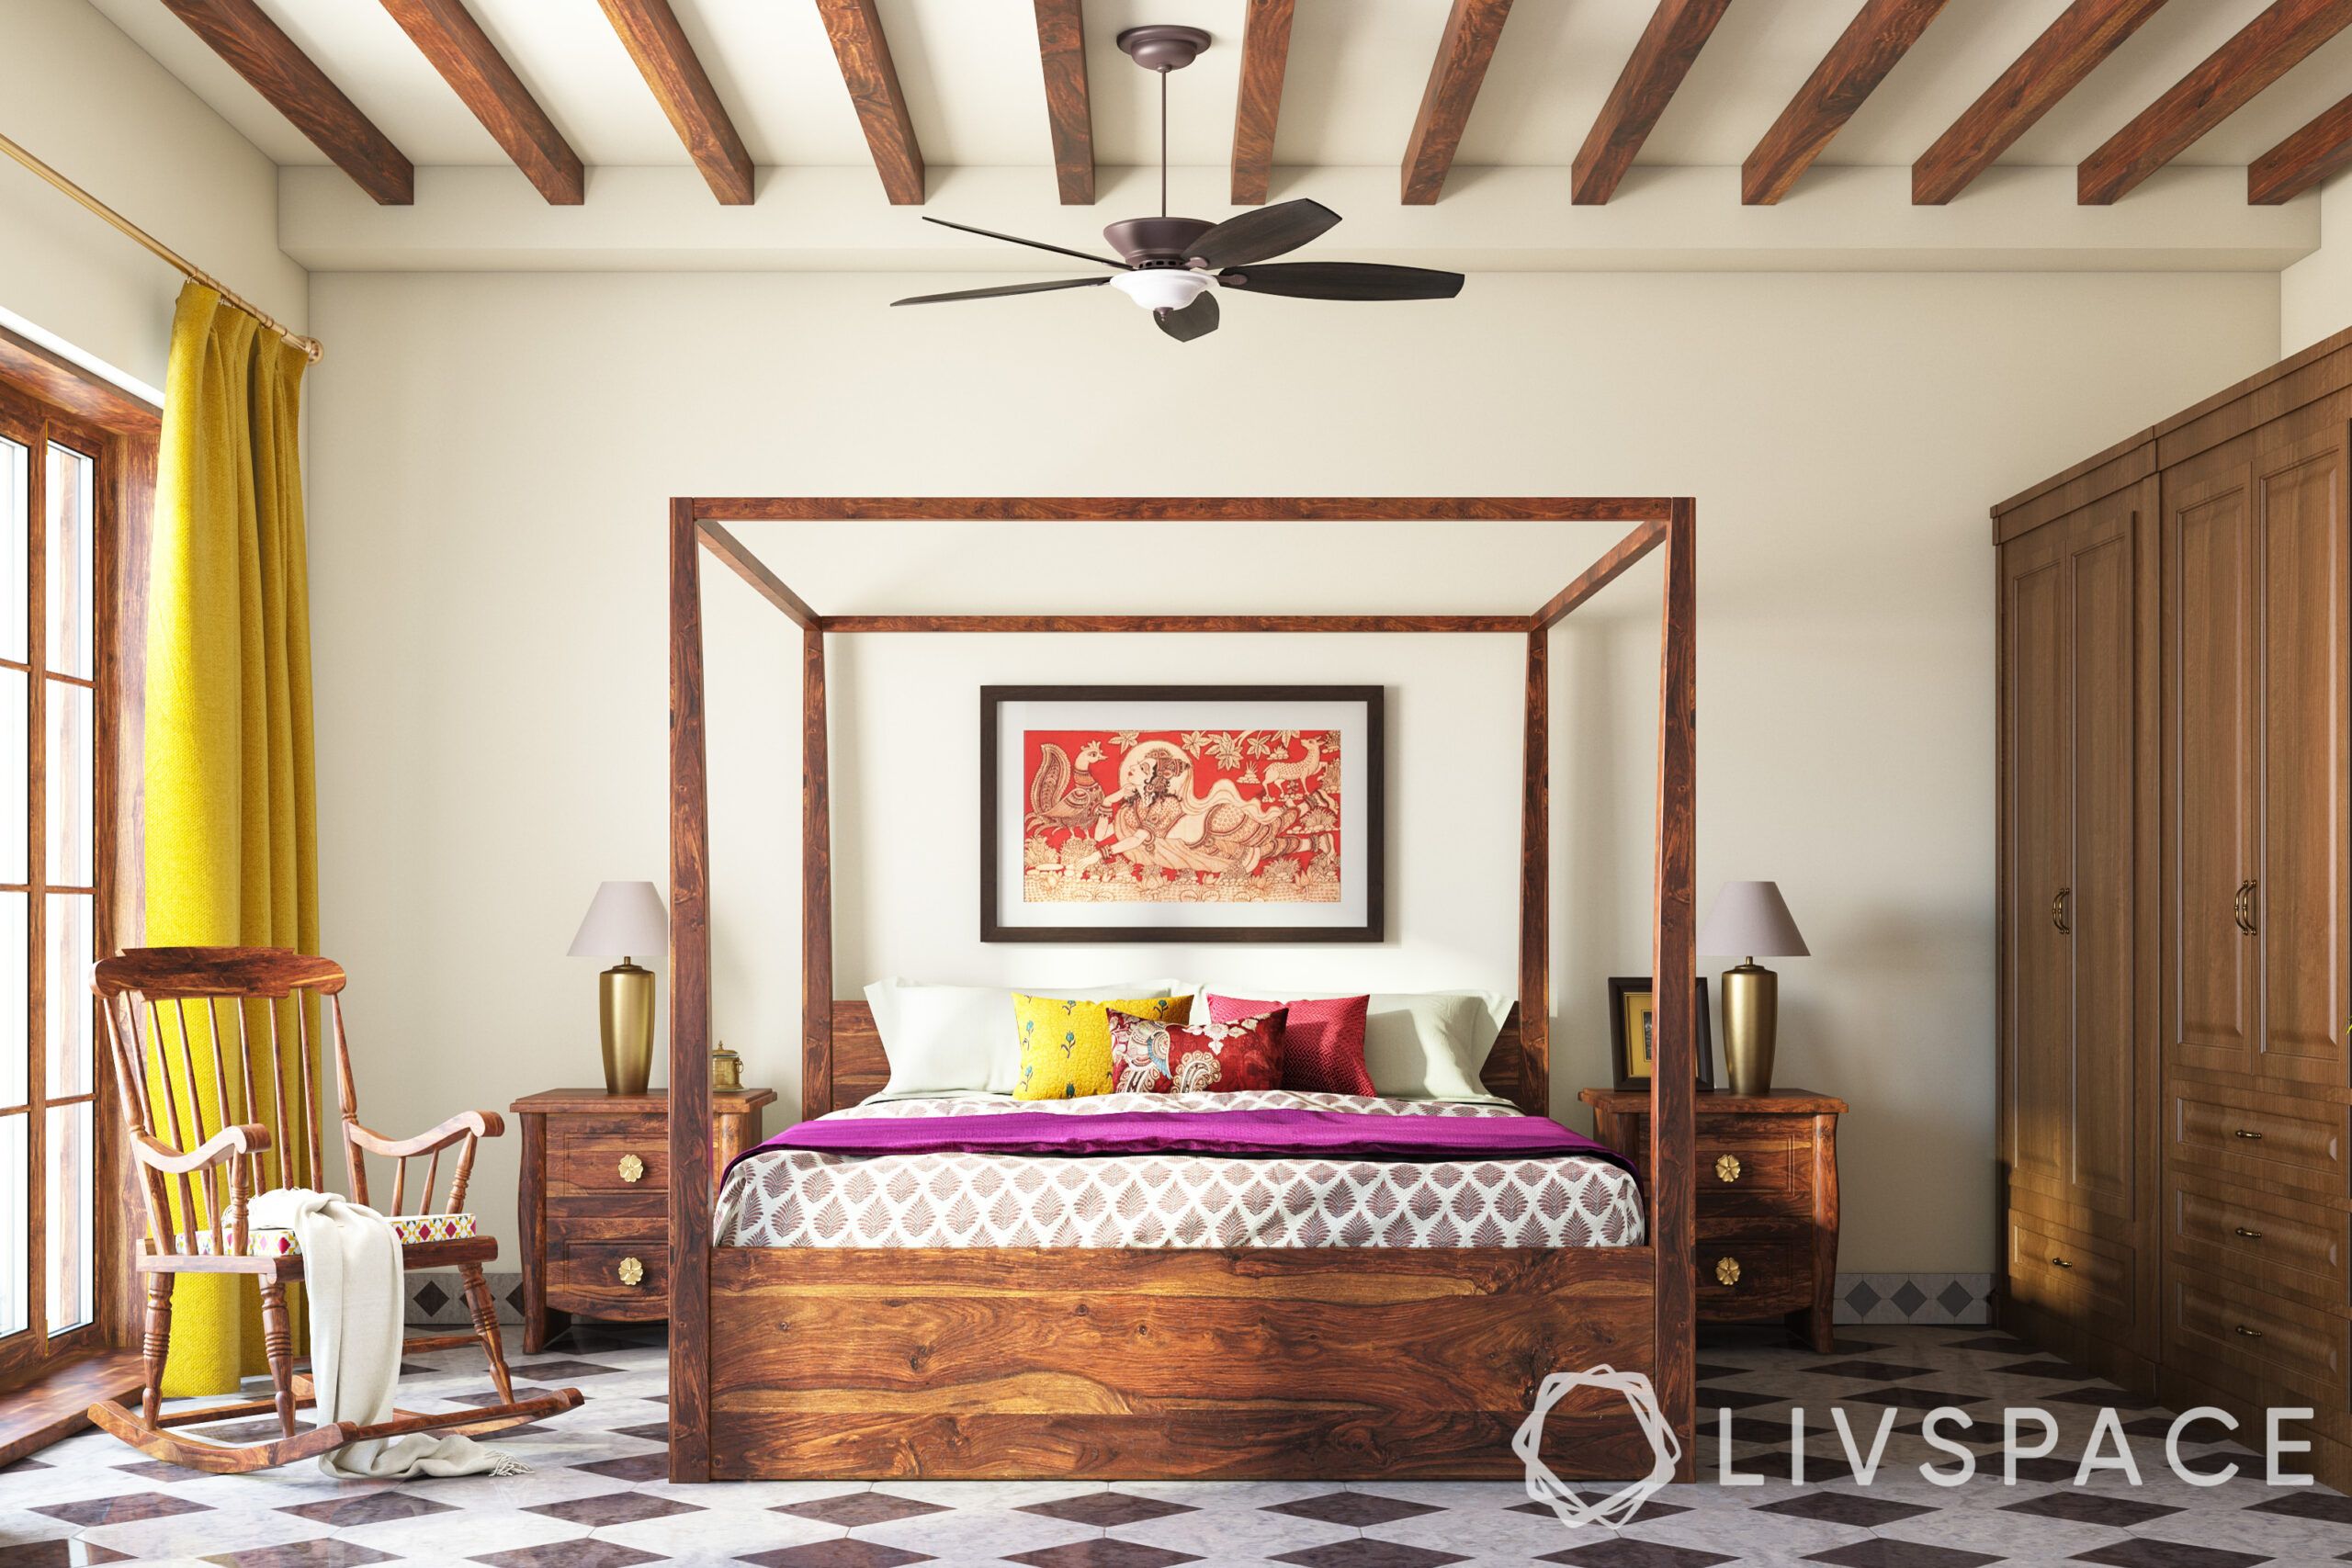 chettinad house-four poster bed-wooden furniture-rocking chair-chessboard tiles-wooden rafters